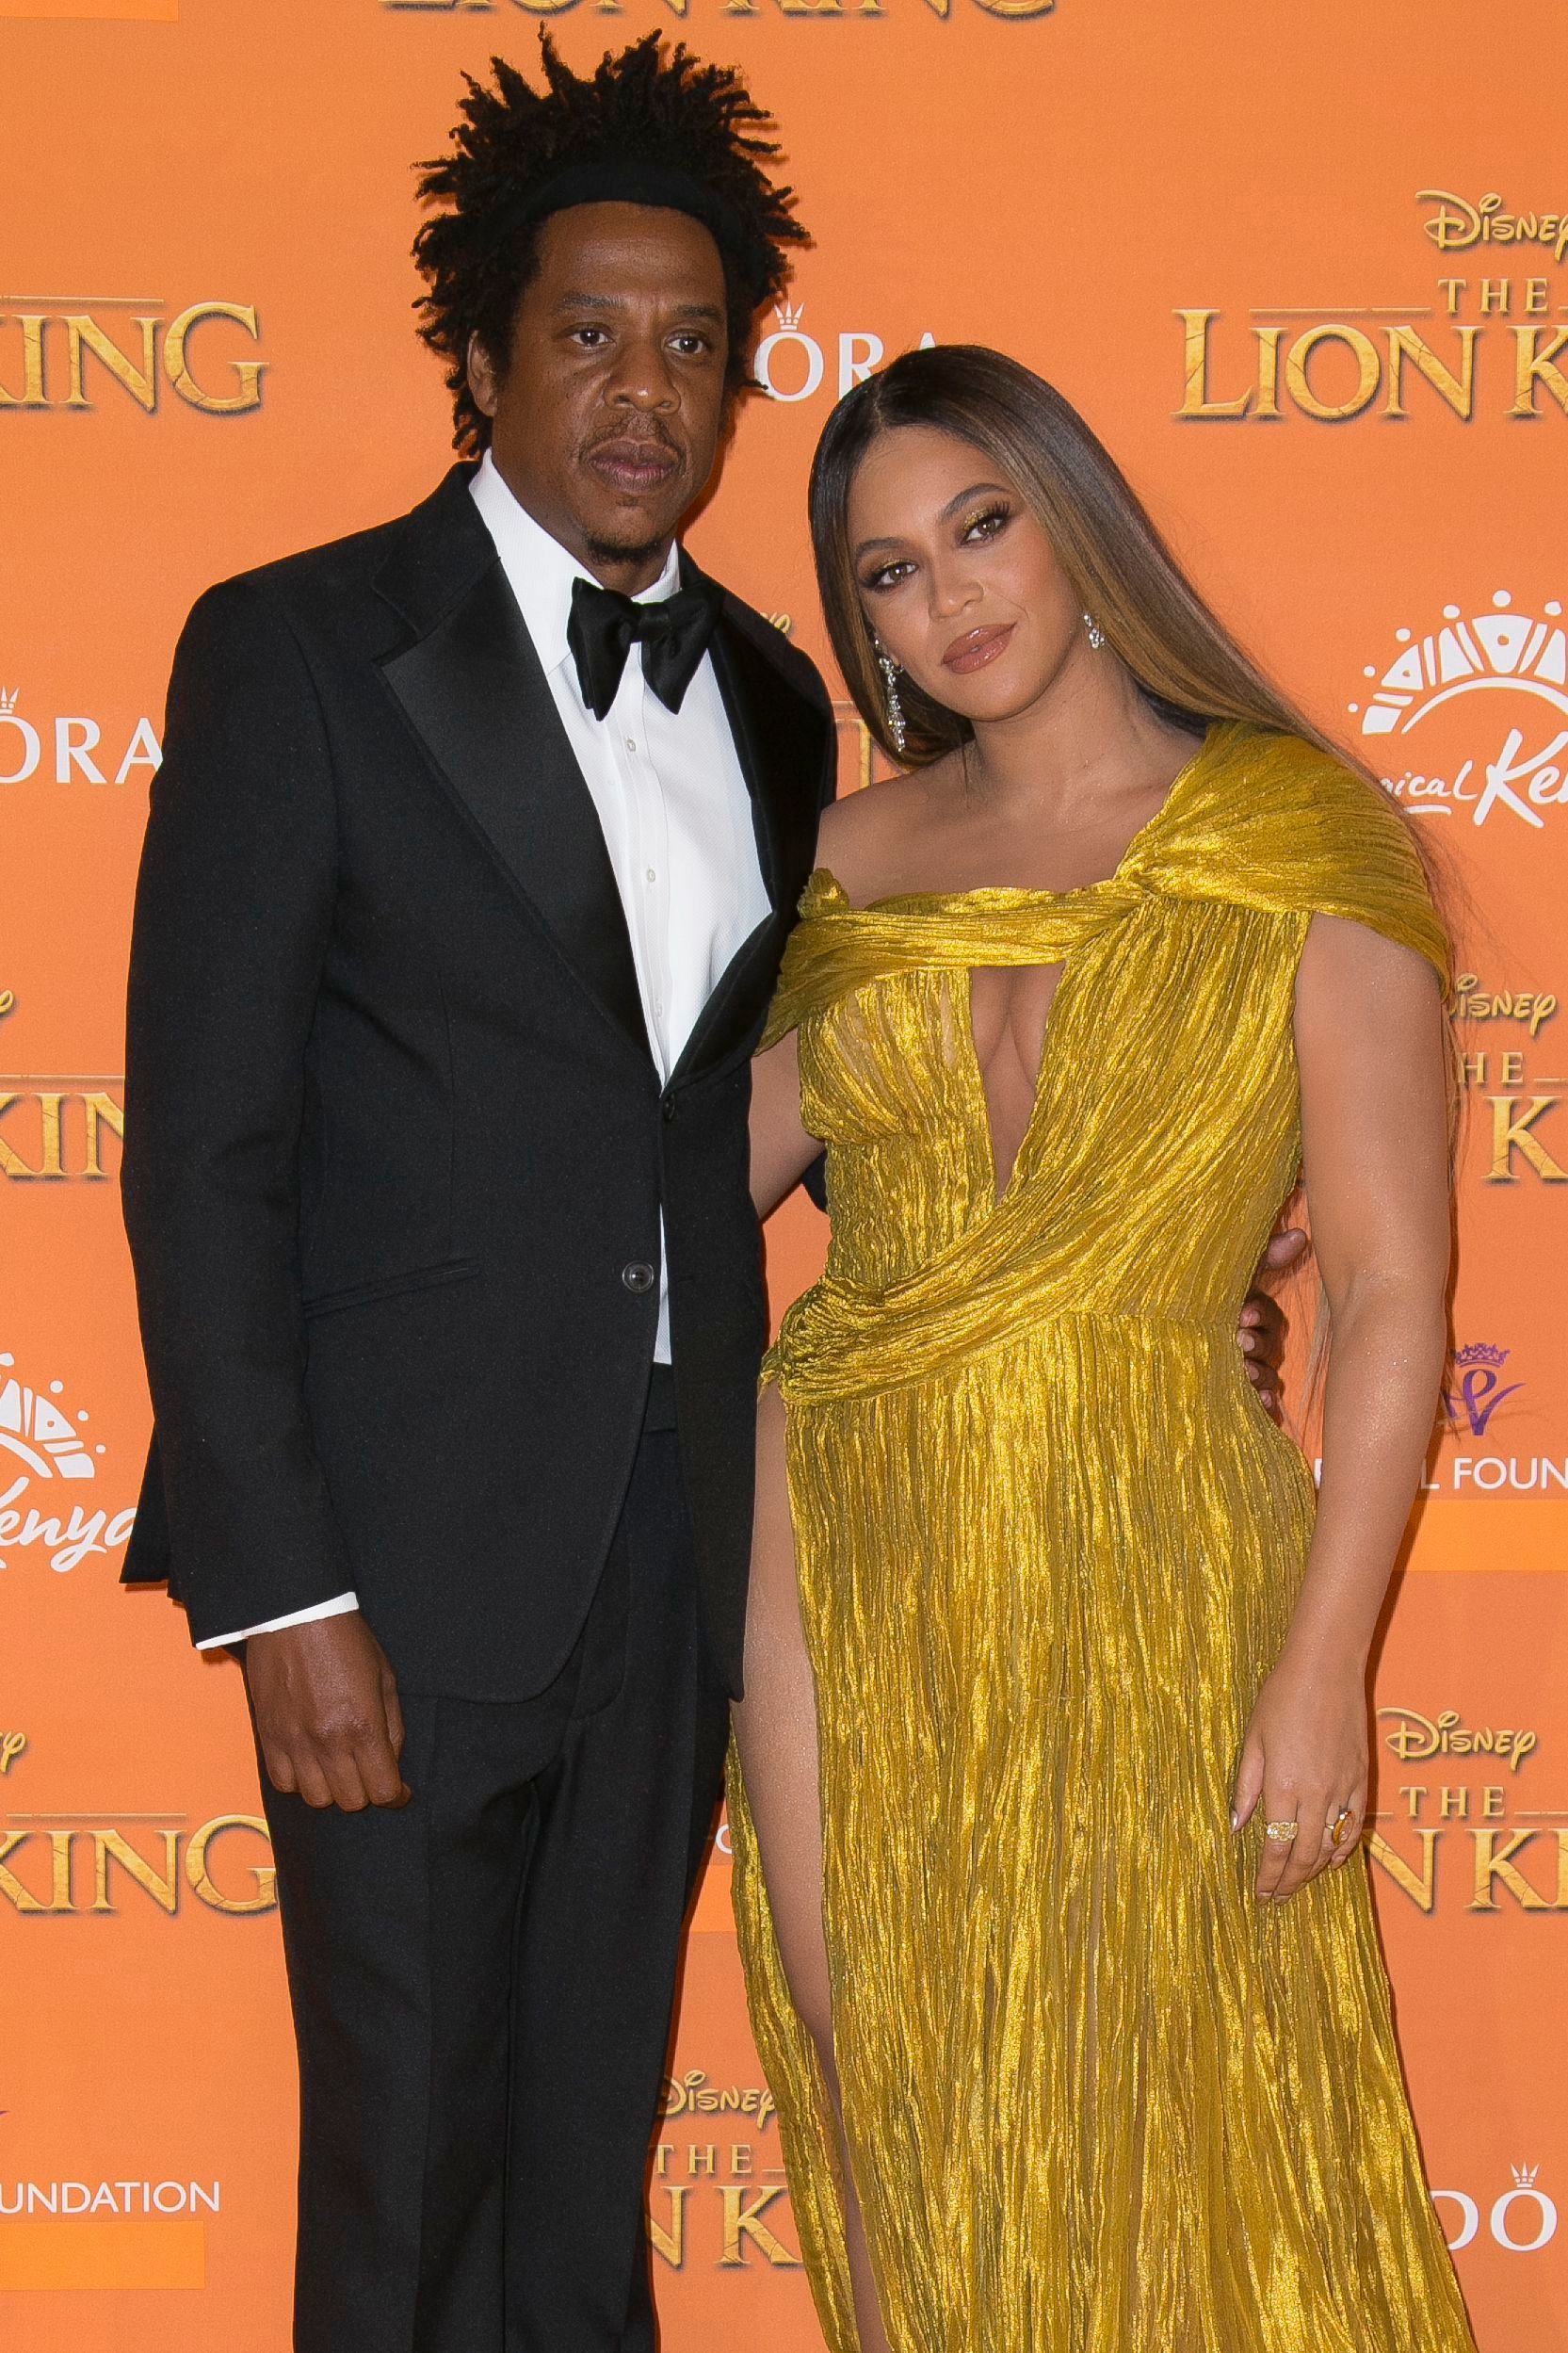 <p>After years of speculation about infidelity in JAY-Z and <a href="https://www.wonderwall.com/celebrity/profiles/overview/beyonce-243.article">Beyonce</a>'s marriage -- much of it fueled by <a href="https://www.wonderwall.com/celebrity/profiles/overview/beyonce-243.article">Beyonce</a> herself on her 2016 "Lemonade" album -- Jay apologized on his 2017 album "4:44." In the months that followed, Jay confirmed he was guilty of "infidelity" in a New York Times interview and went on to explain why and how they saved their marriage. In a January 2018 interview on CNN's the "Van Jones" Show," he said, "That's my soulmate. It's the person I love... We chose to fight for our love, for our family to give our kids a different outcome -- to break that cycle for black men and women." In an interview with David Letterman -- who's also confessed to cheating on his wife -- for the comedian's Netflix show, "My Next Guest Needs No Introduction," Jay said he and Bey made it through thanks to therapy. "Much like you, I have a beautiful wife who was understanding and who knew that I'm not the worst of what I've done and who did the hard work of going to therapy and really, we love each other," Jay said. "We really put in the work."</p>